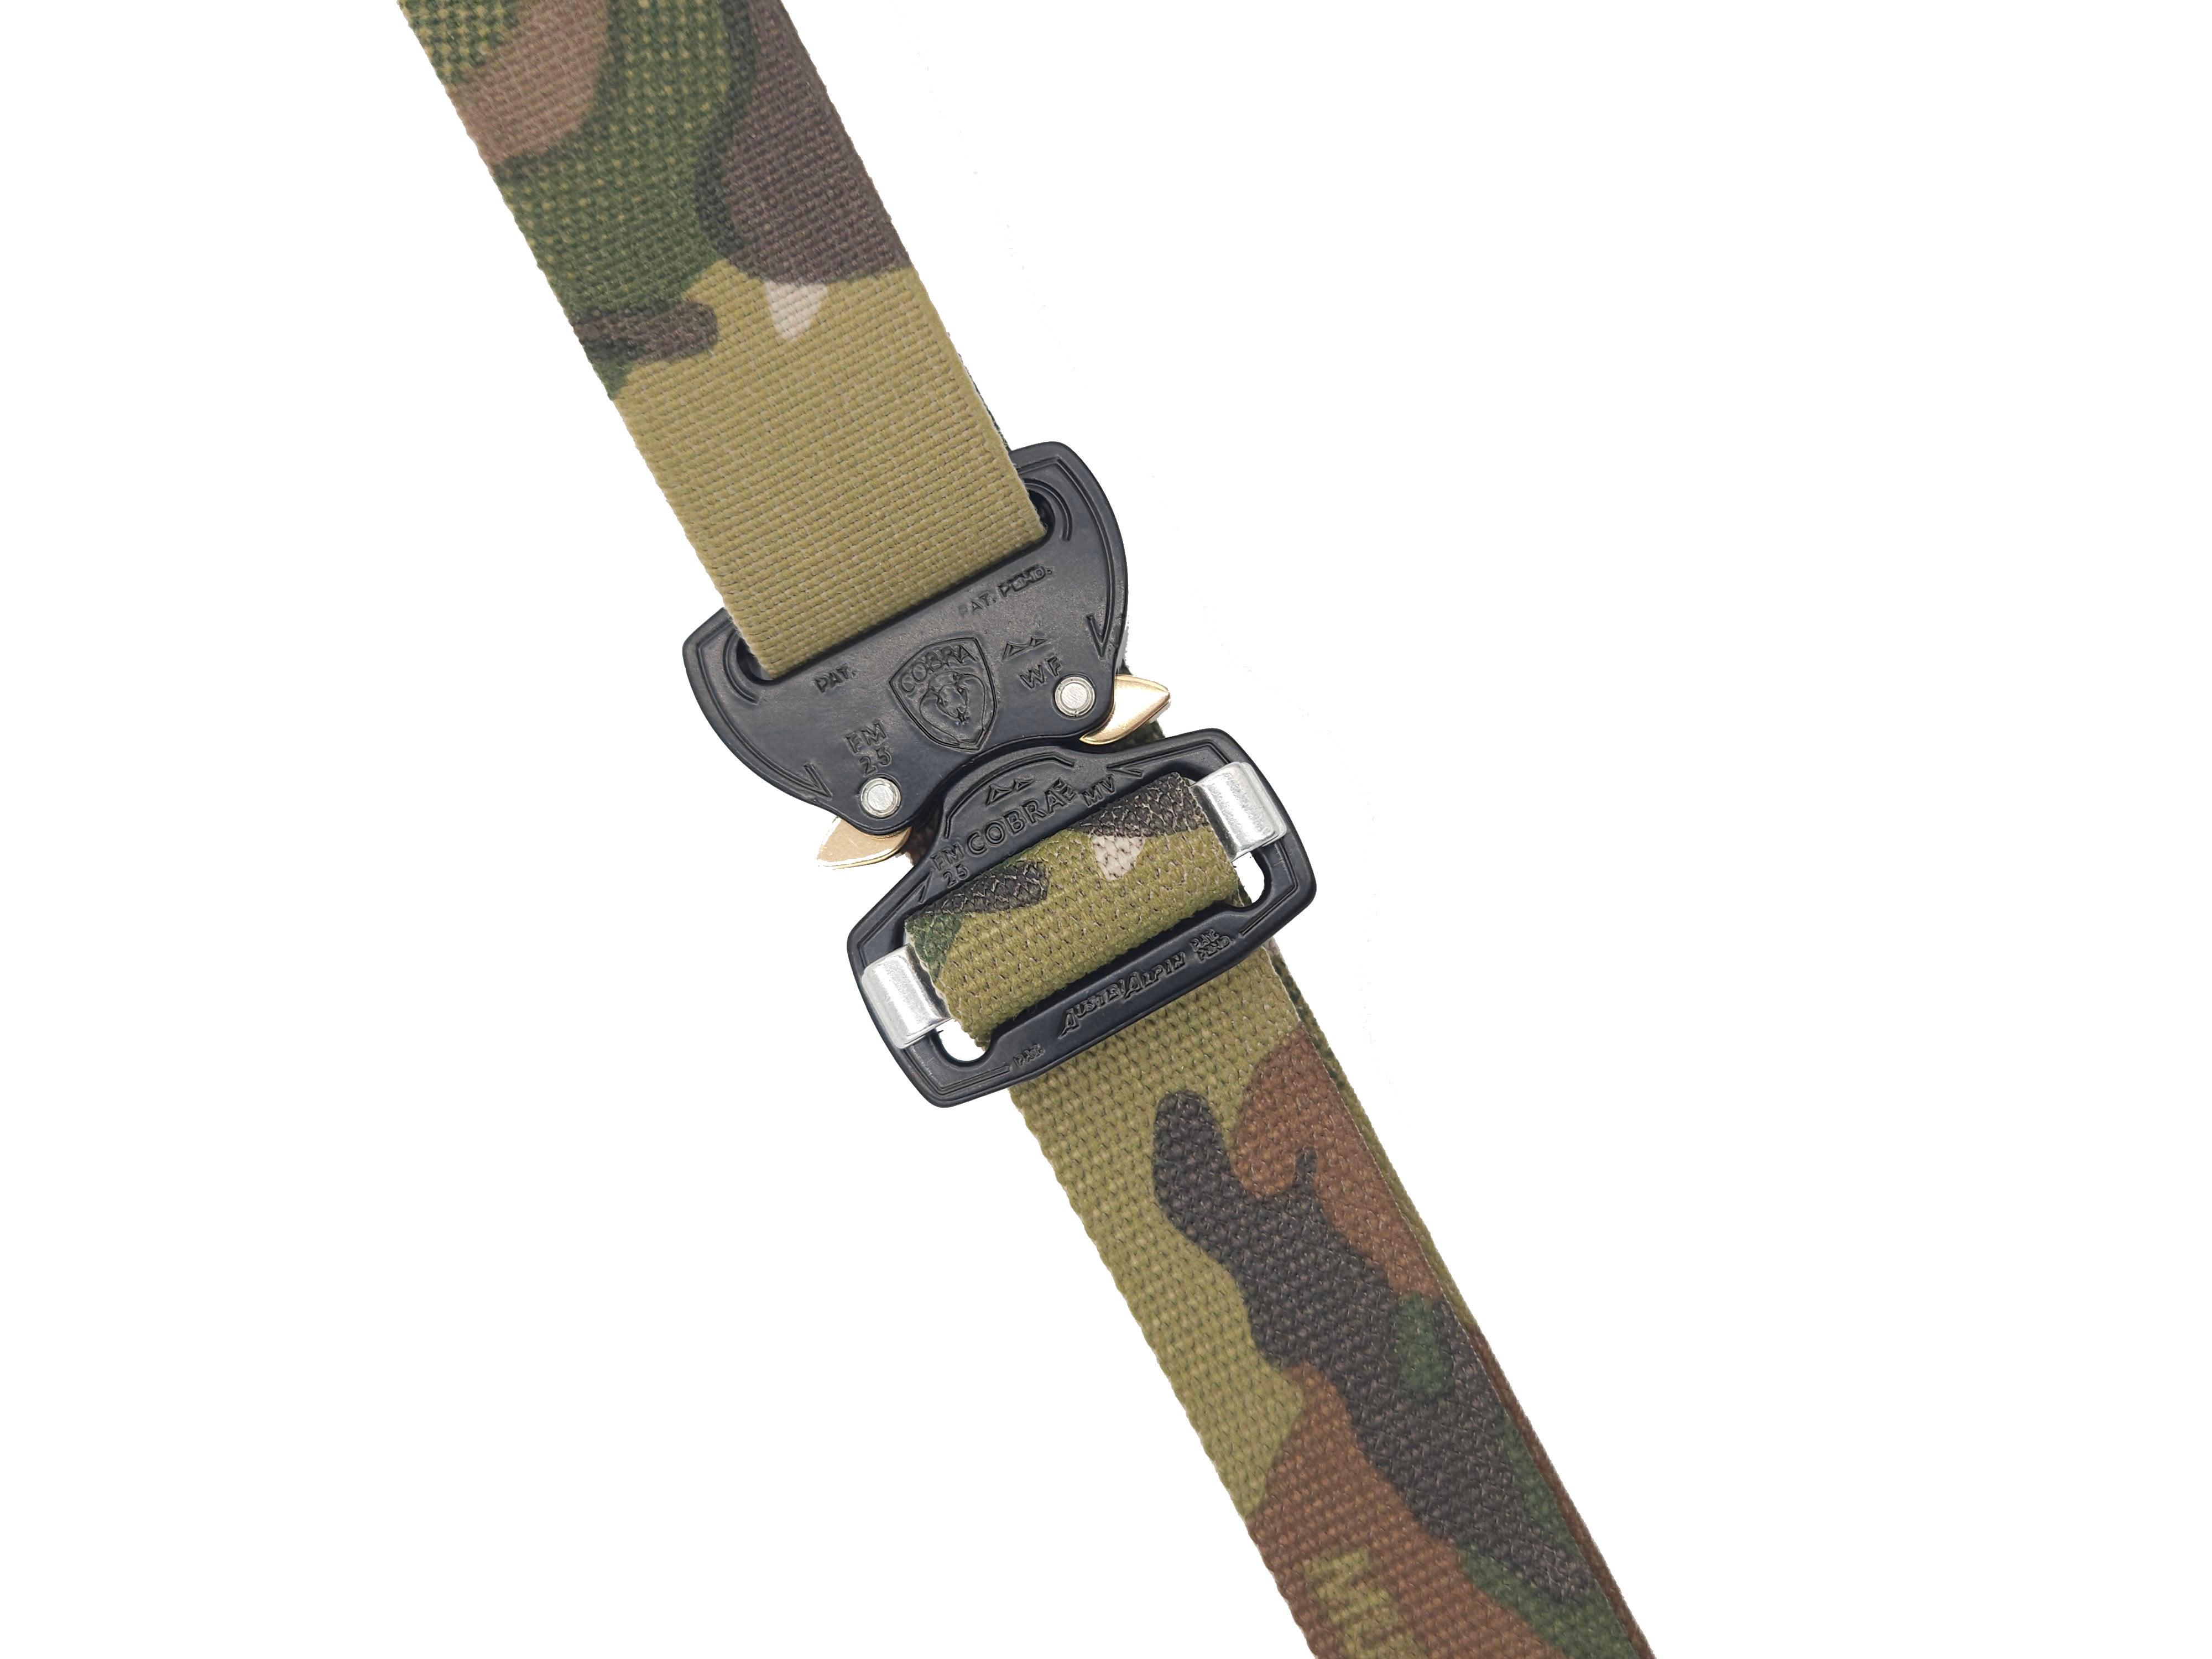 Holster Leg Strap – Forge Concepts